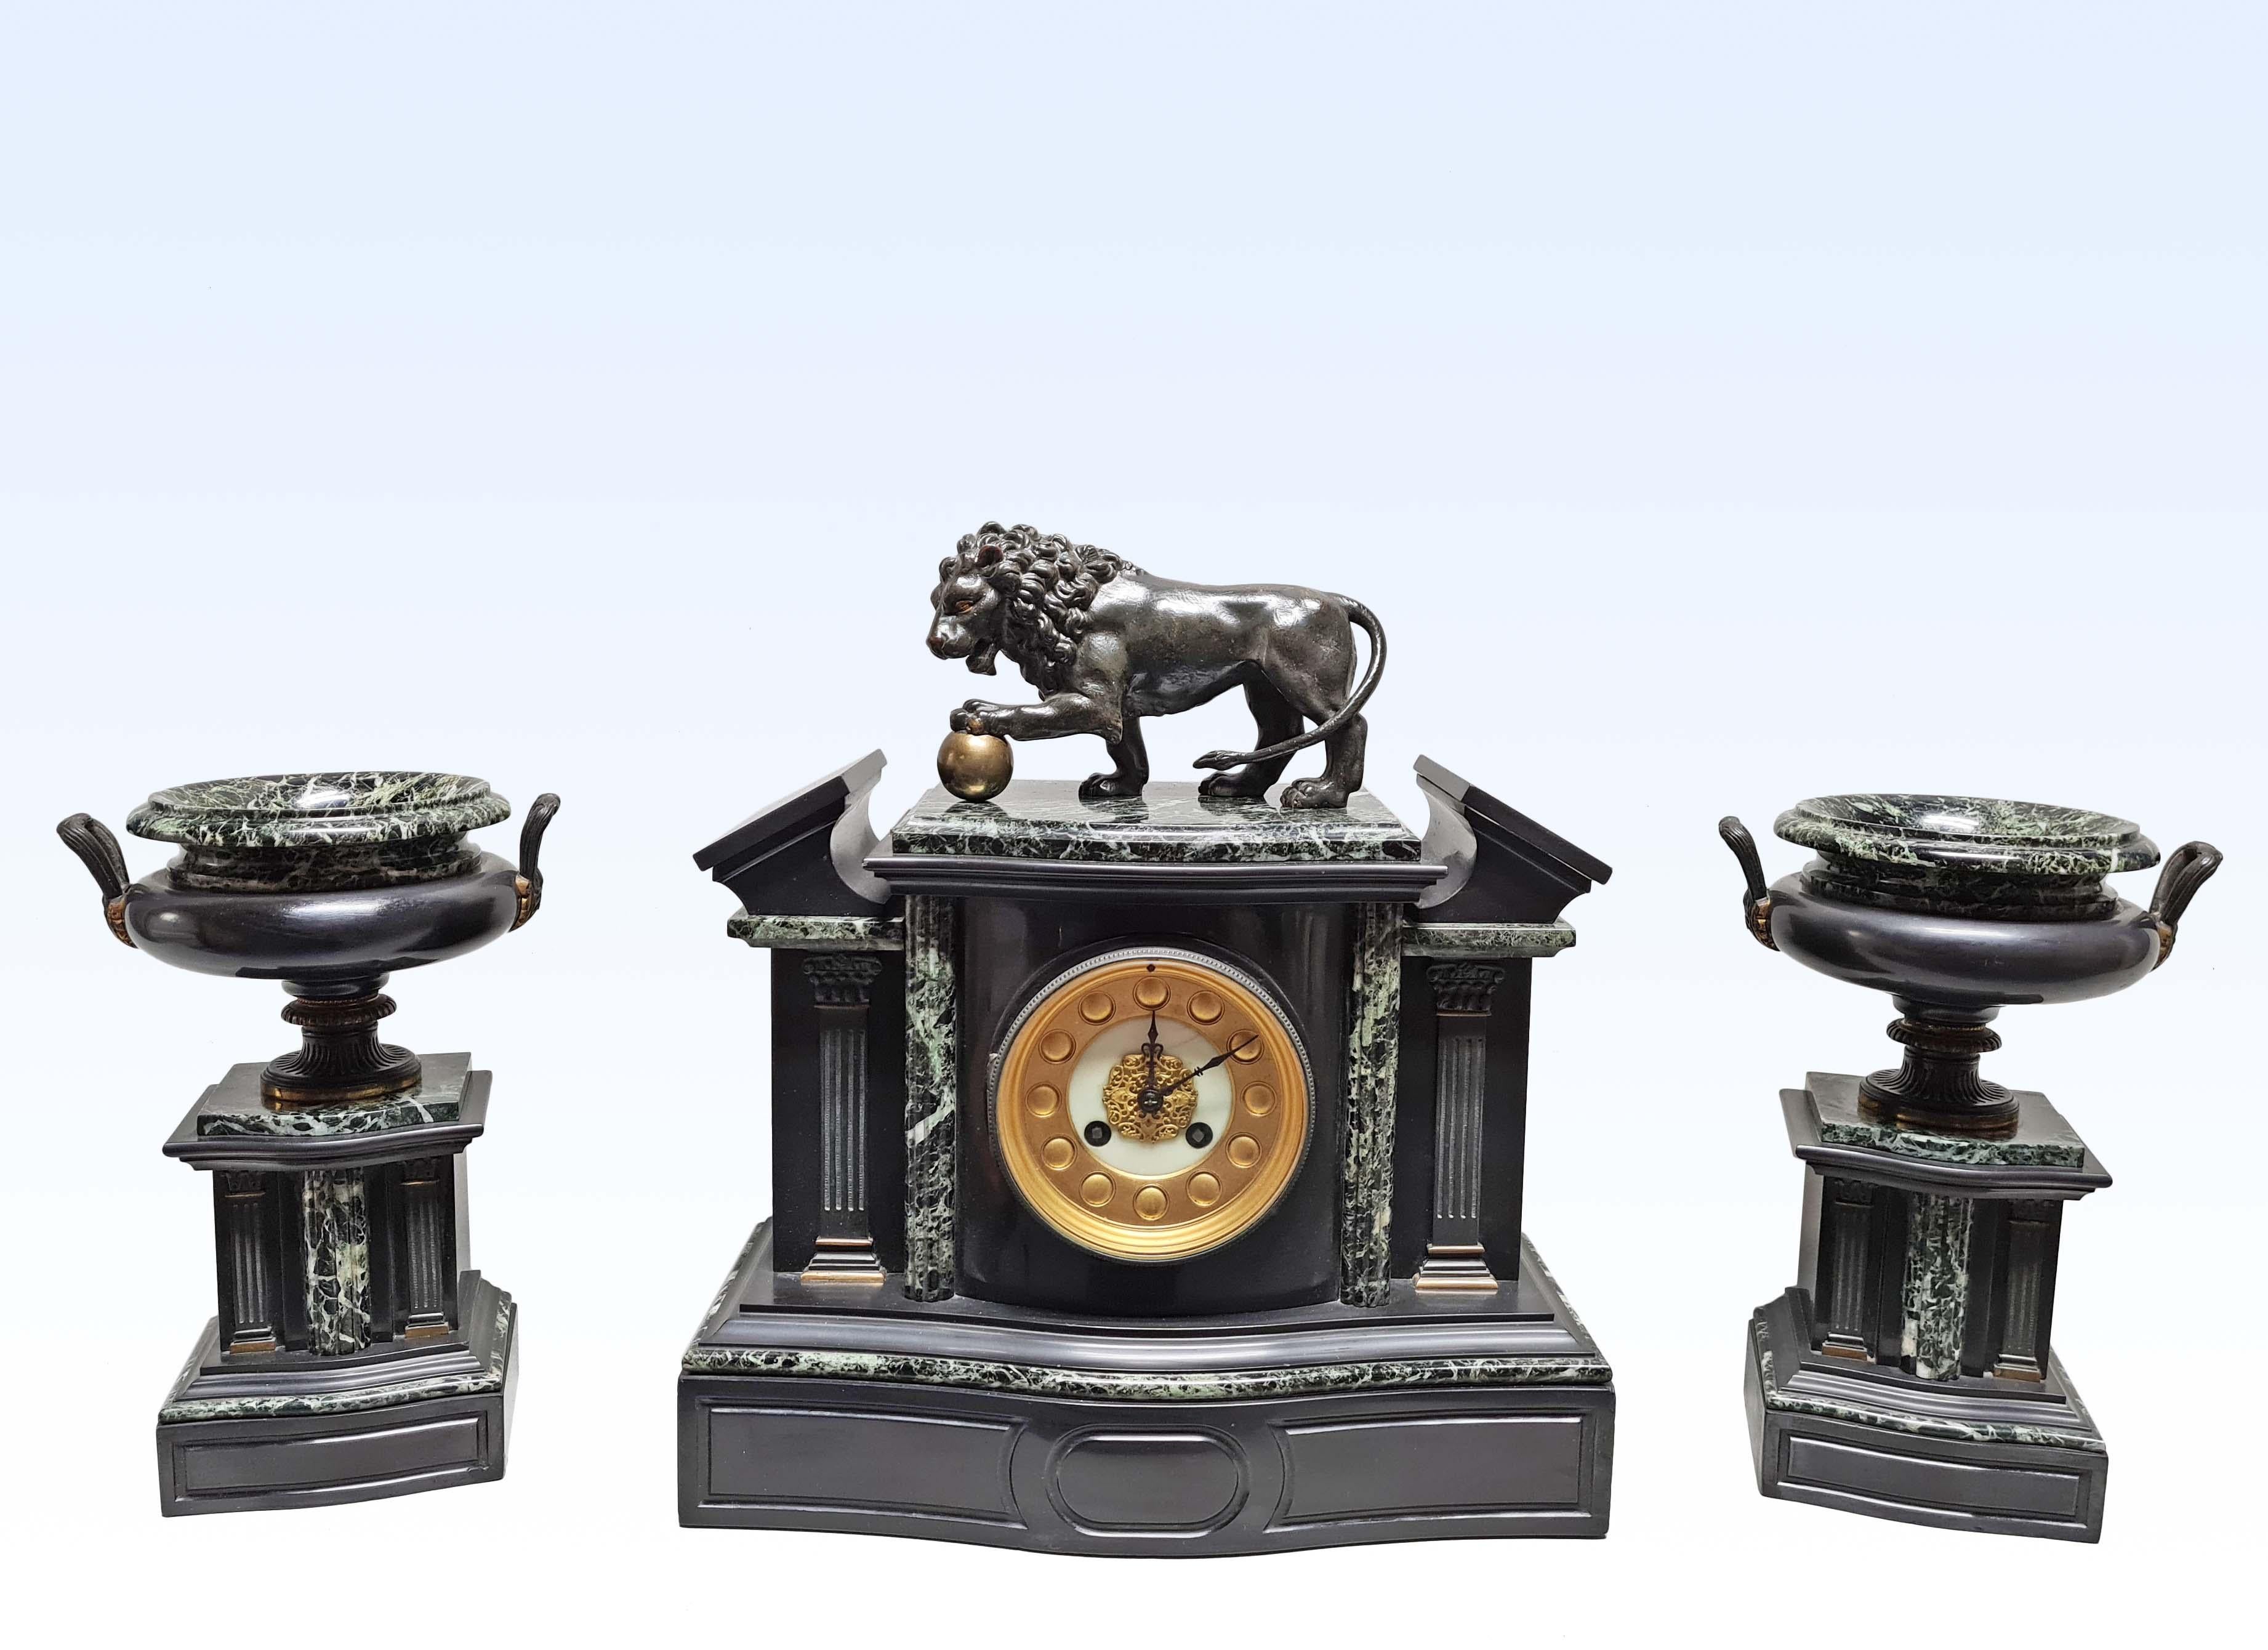 Clock, architectural form, in black and green marble, the dial in gilded bronze, pilasters in patinated bronze with Corinthian capitals, the pediment framing a terrace welcoming the lion of the Medici * in patinated bronze.
Pair of cassolettes, in